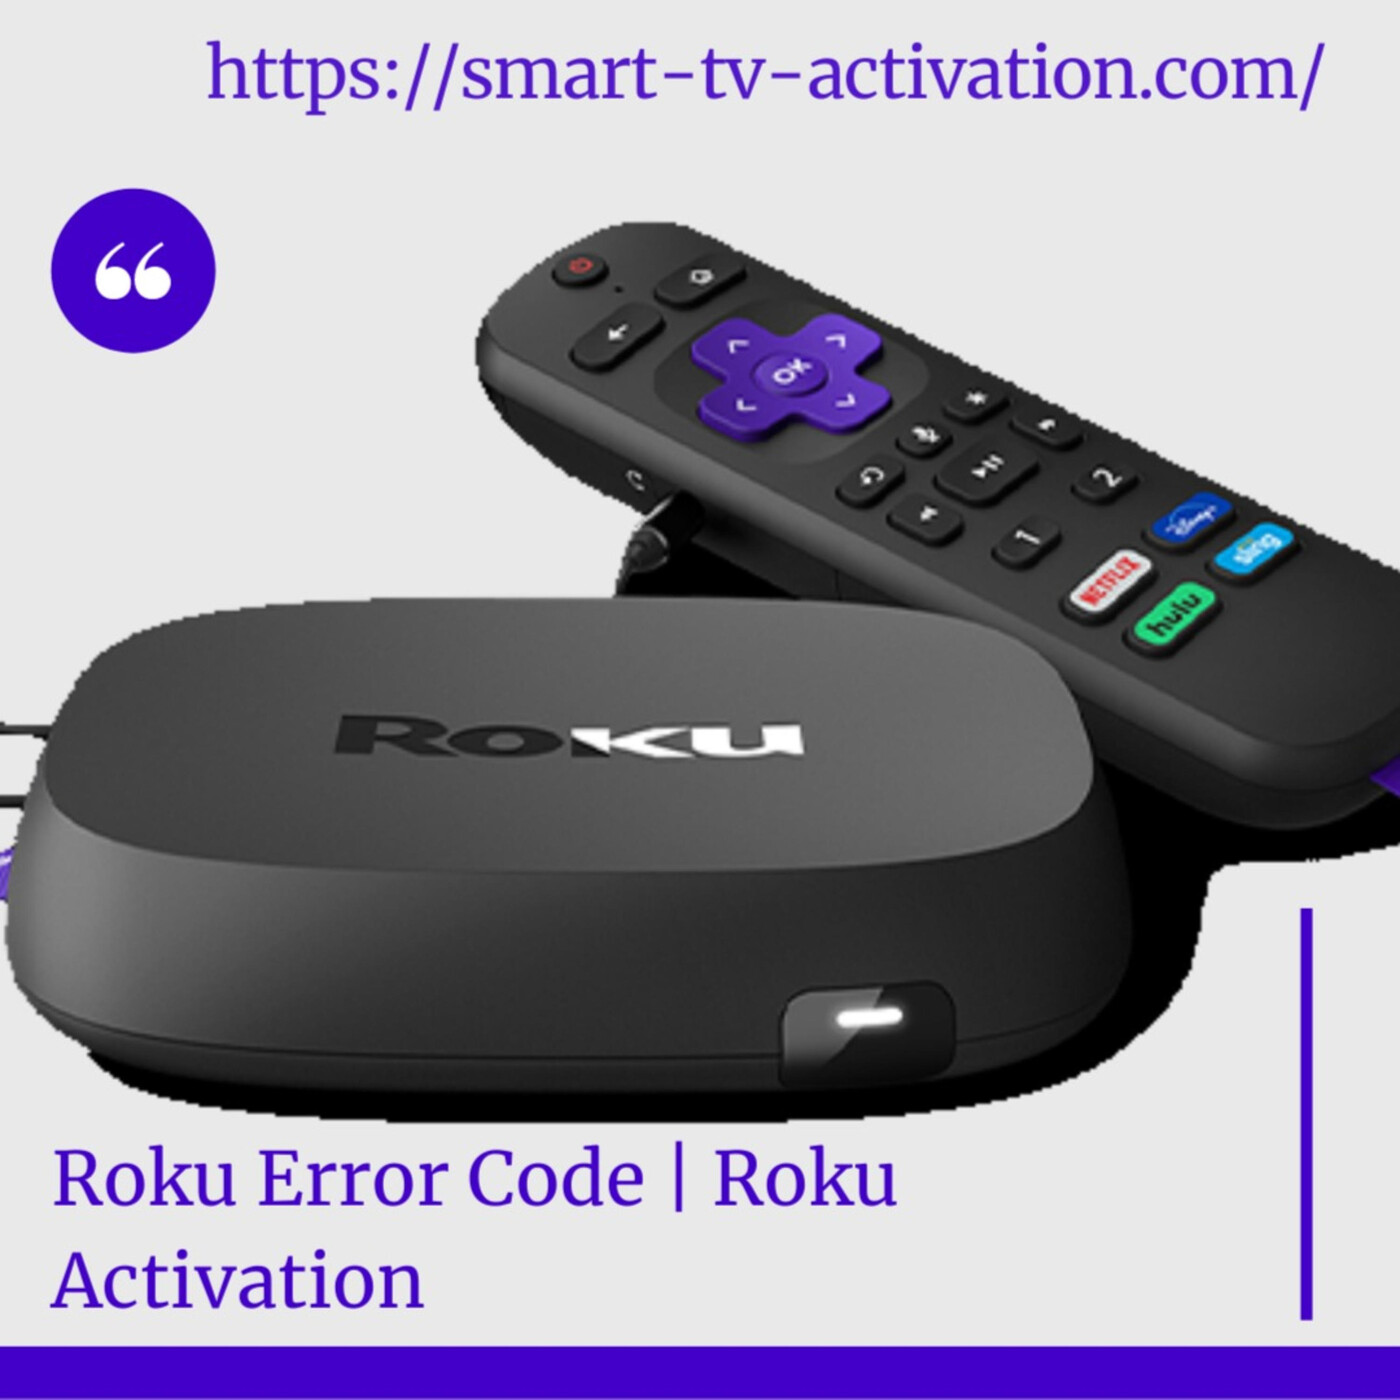 Fix Connect Roku to WiFi Without Remote